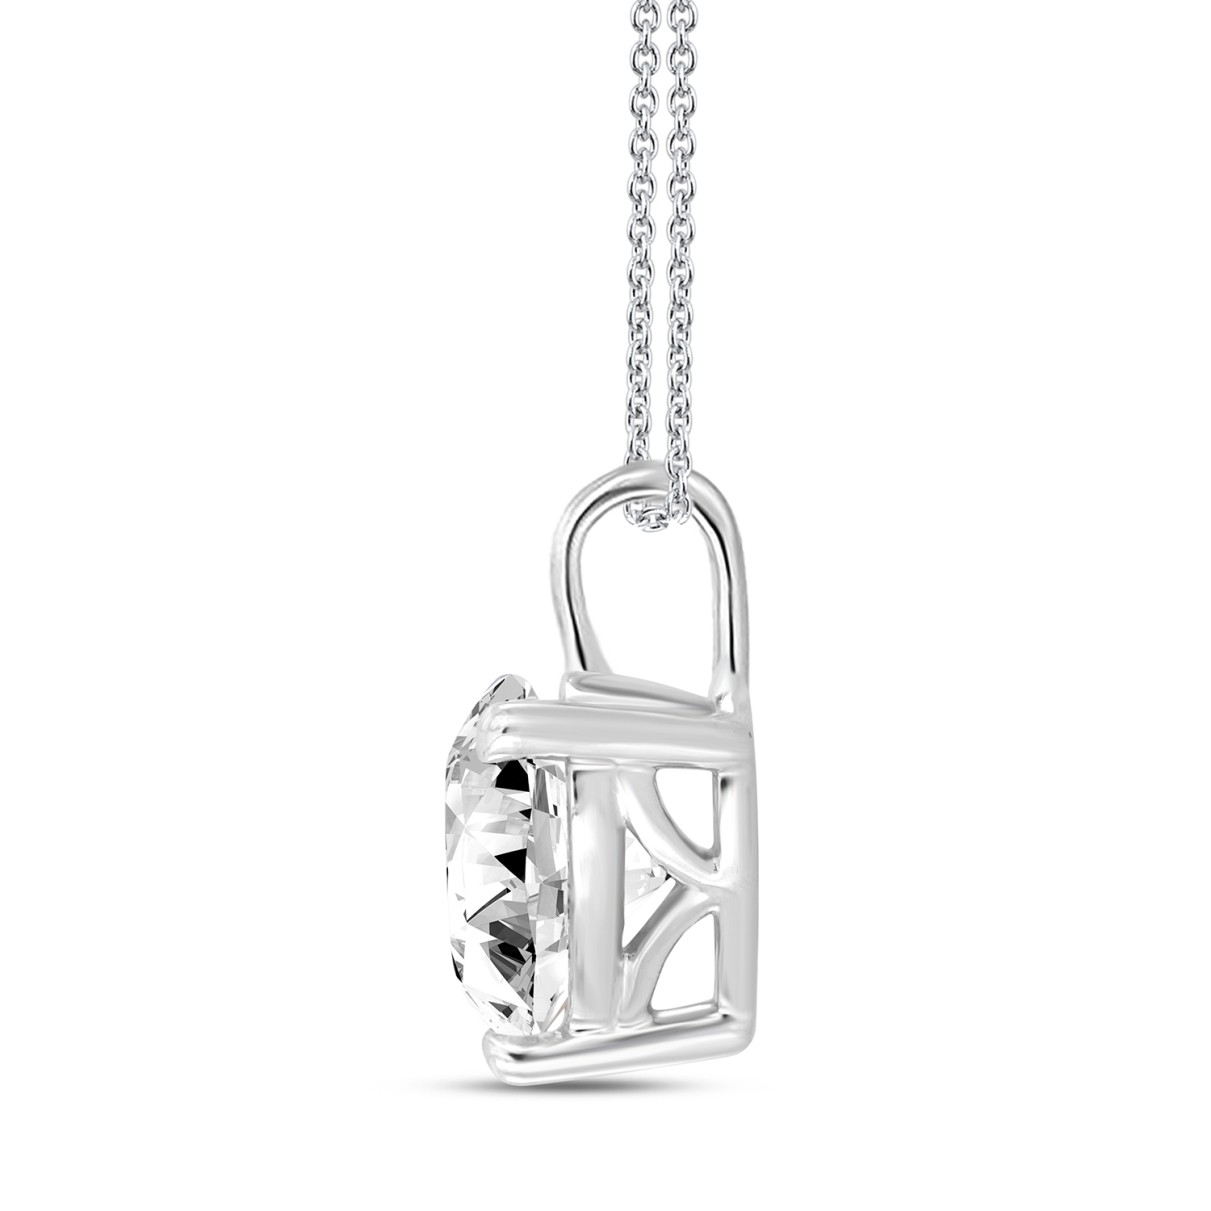 LADIES SOLITAIRE PENDANT WITH CHAIN 3CT HEART DIAMOND 14K WHITE GOLD 